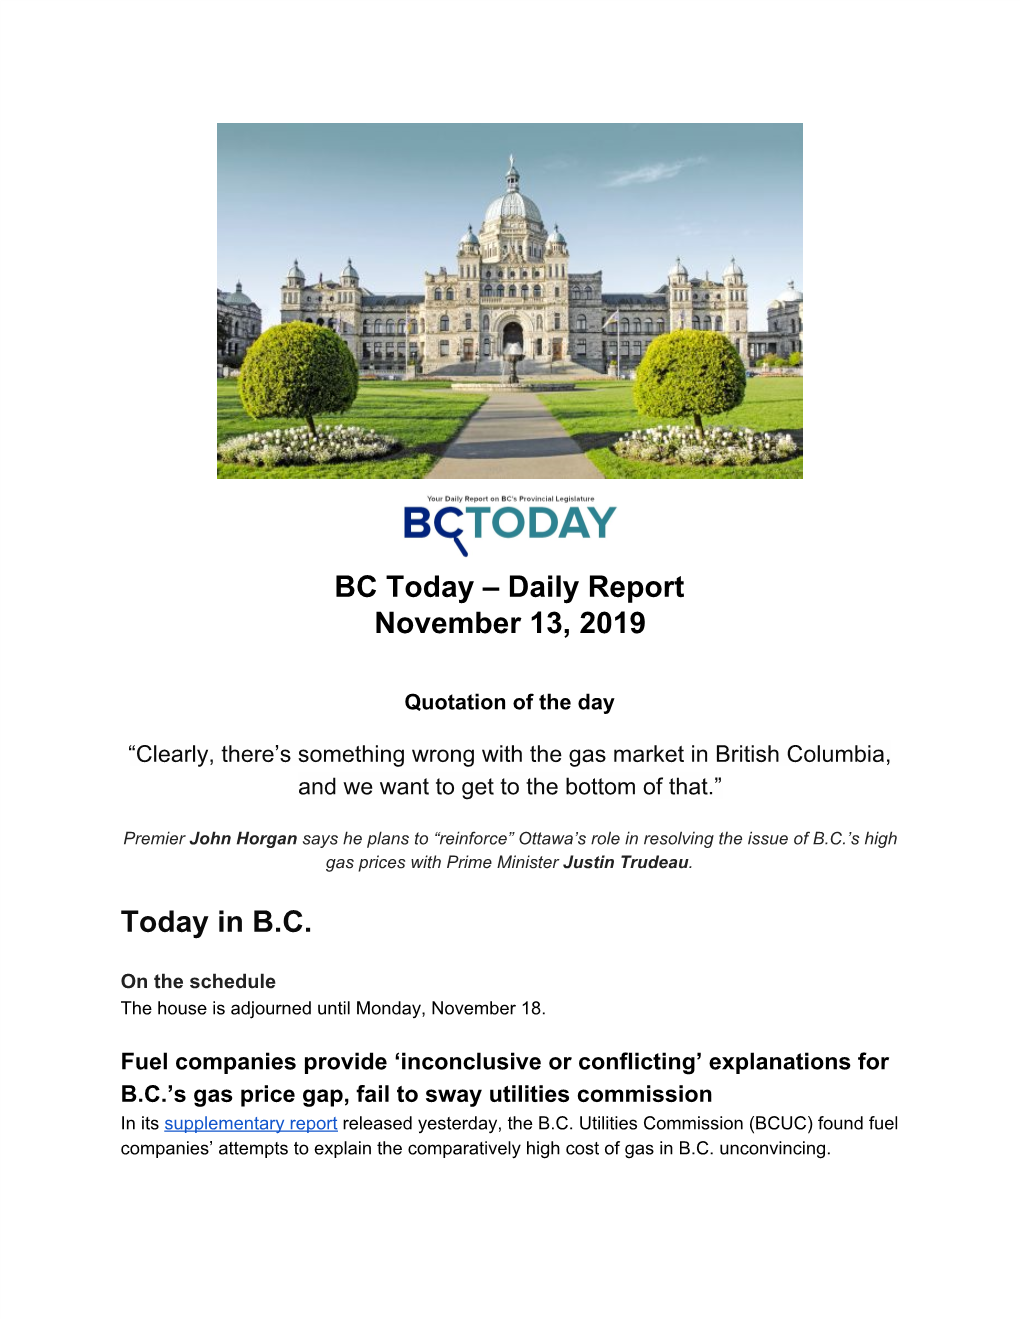 Daily Report November 13, 2019 Today in BC